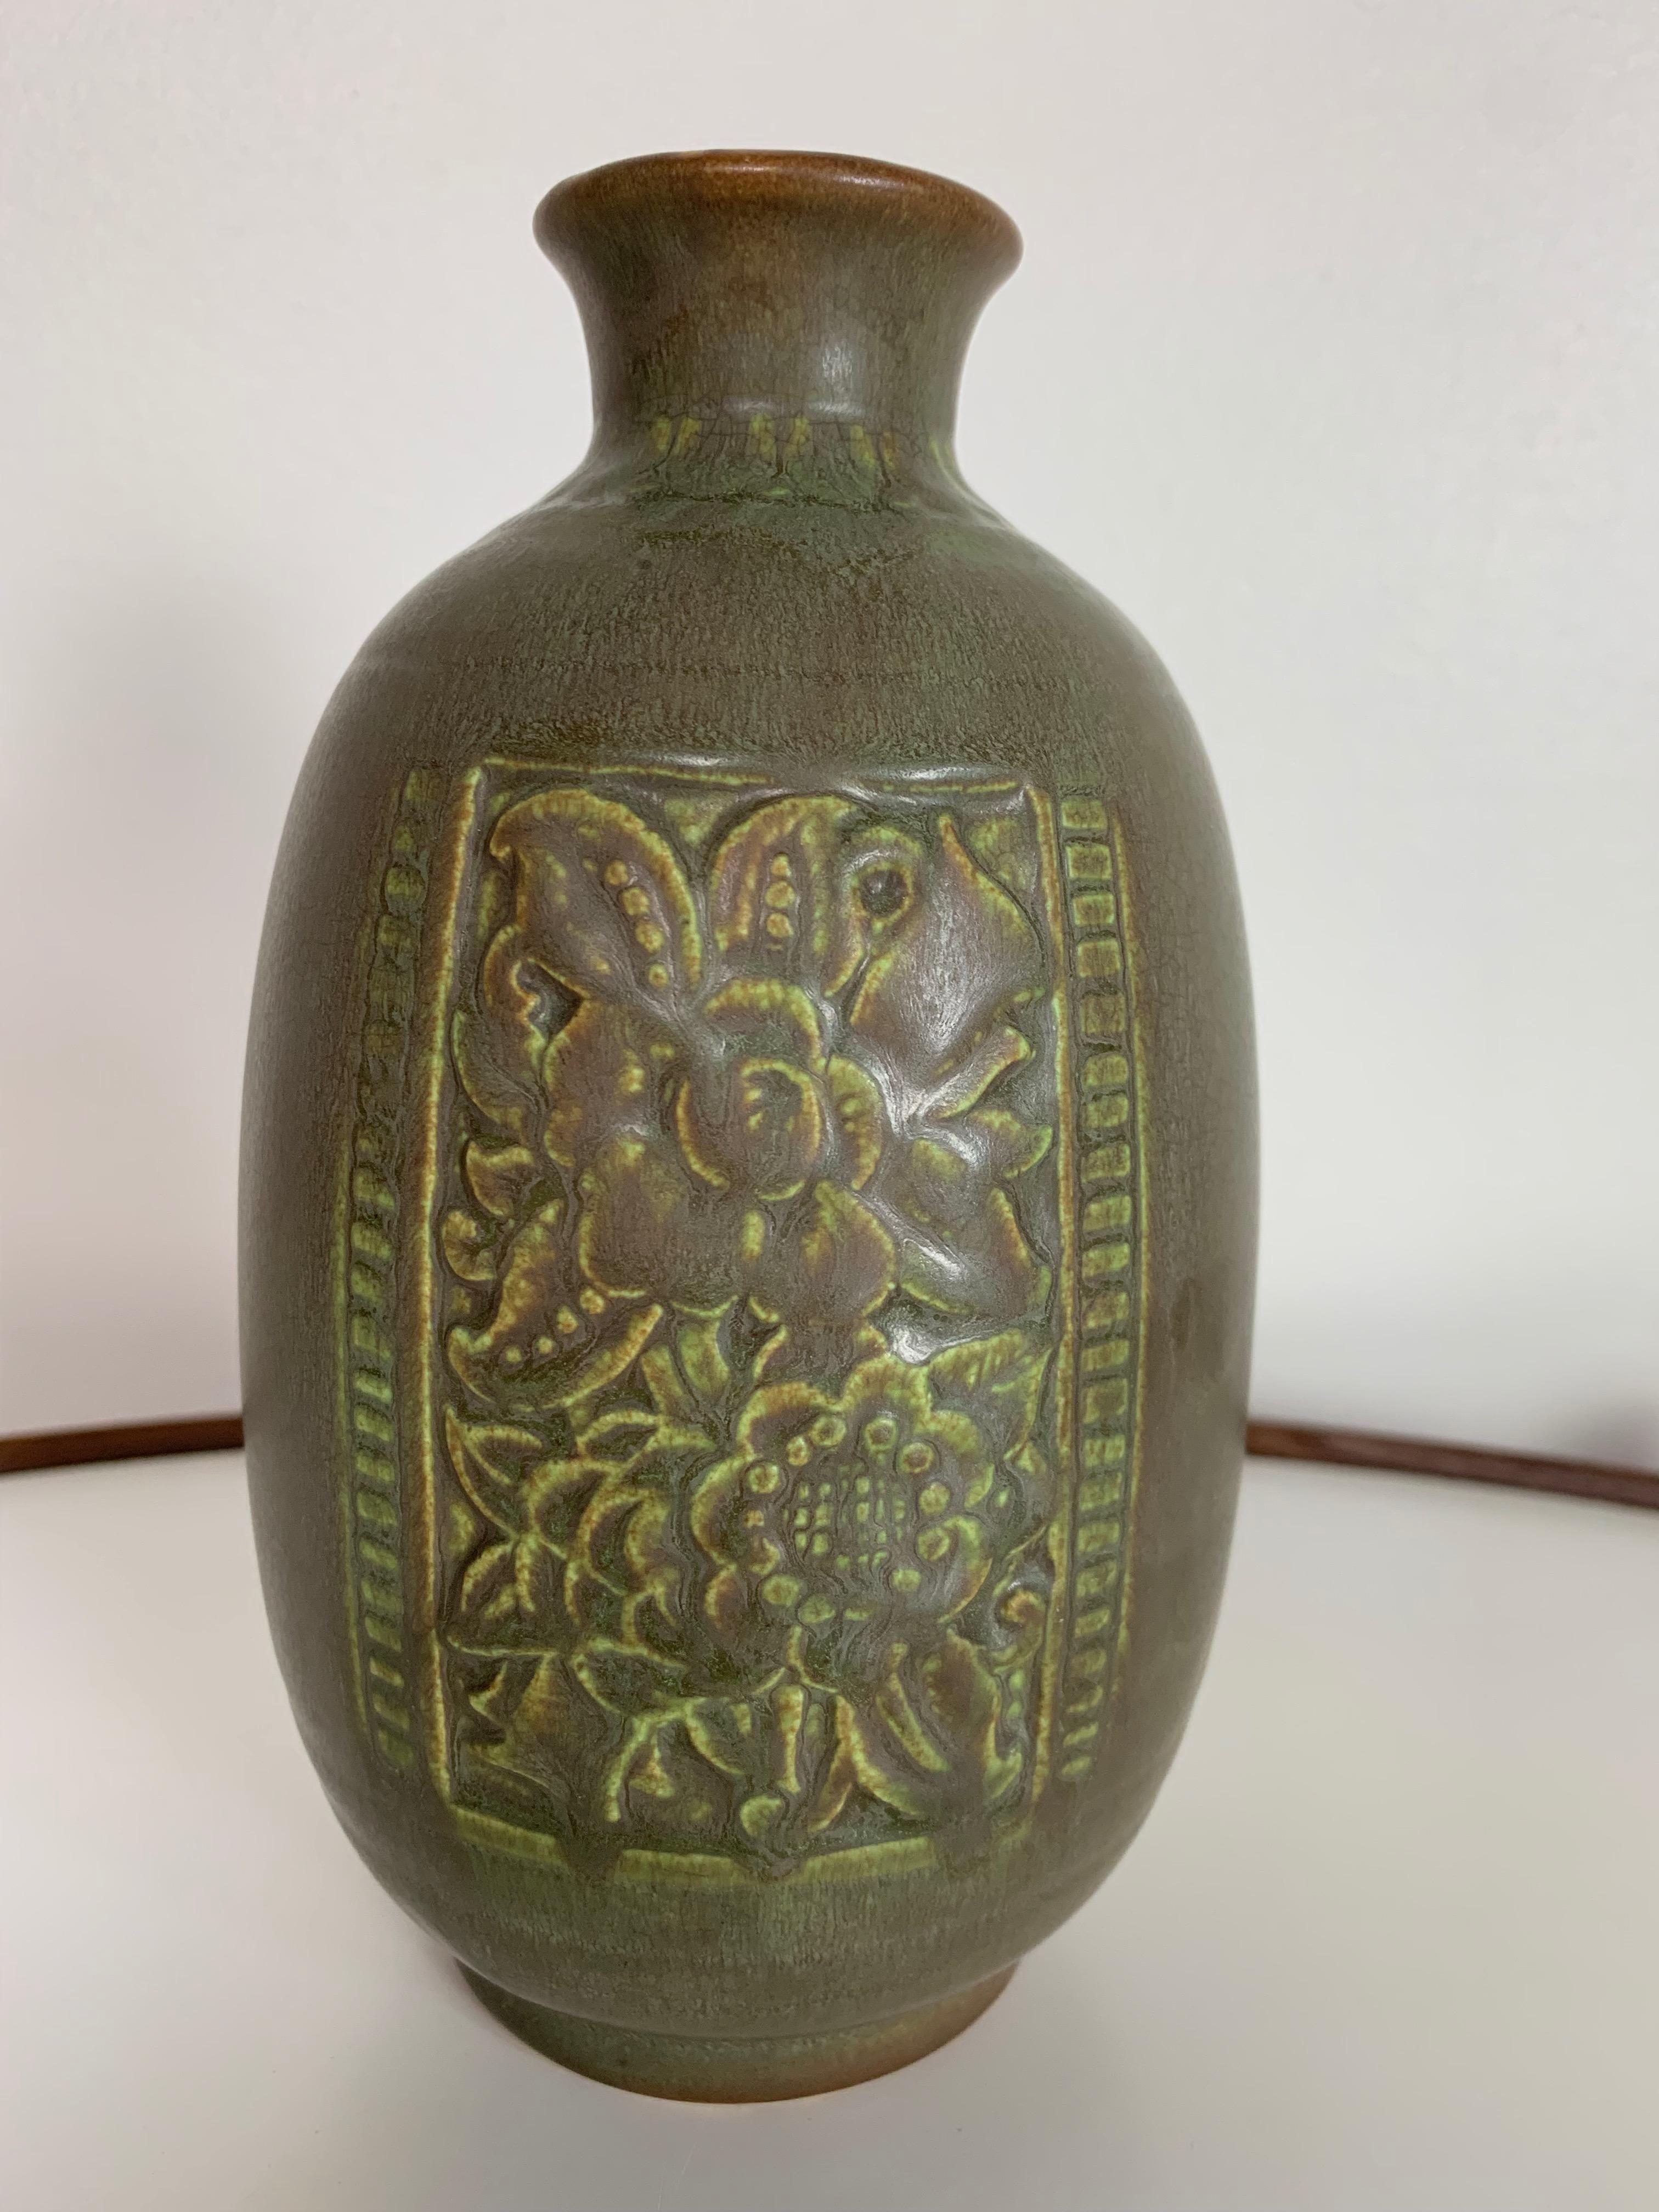 Lovely chartreuse matte glazed vase with two incised floral panels. Incised rookwood mark along with the number 6376, XXXIII, and CCL for Clara Christina Lindeman.